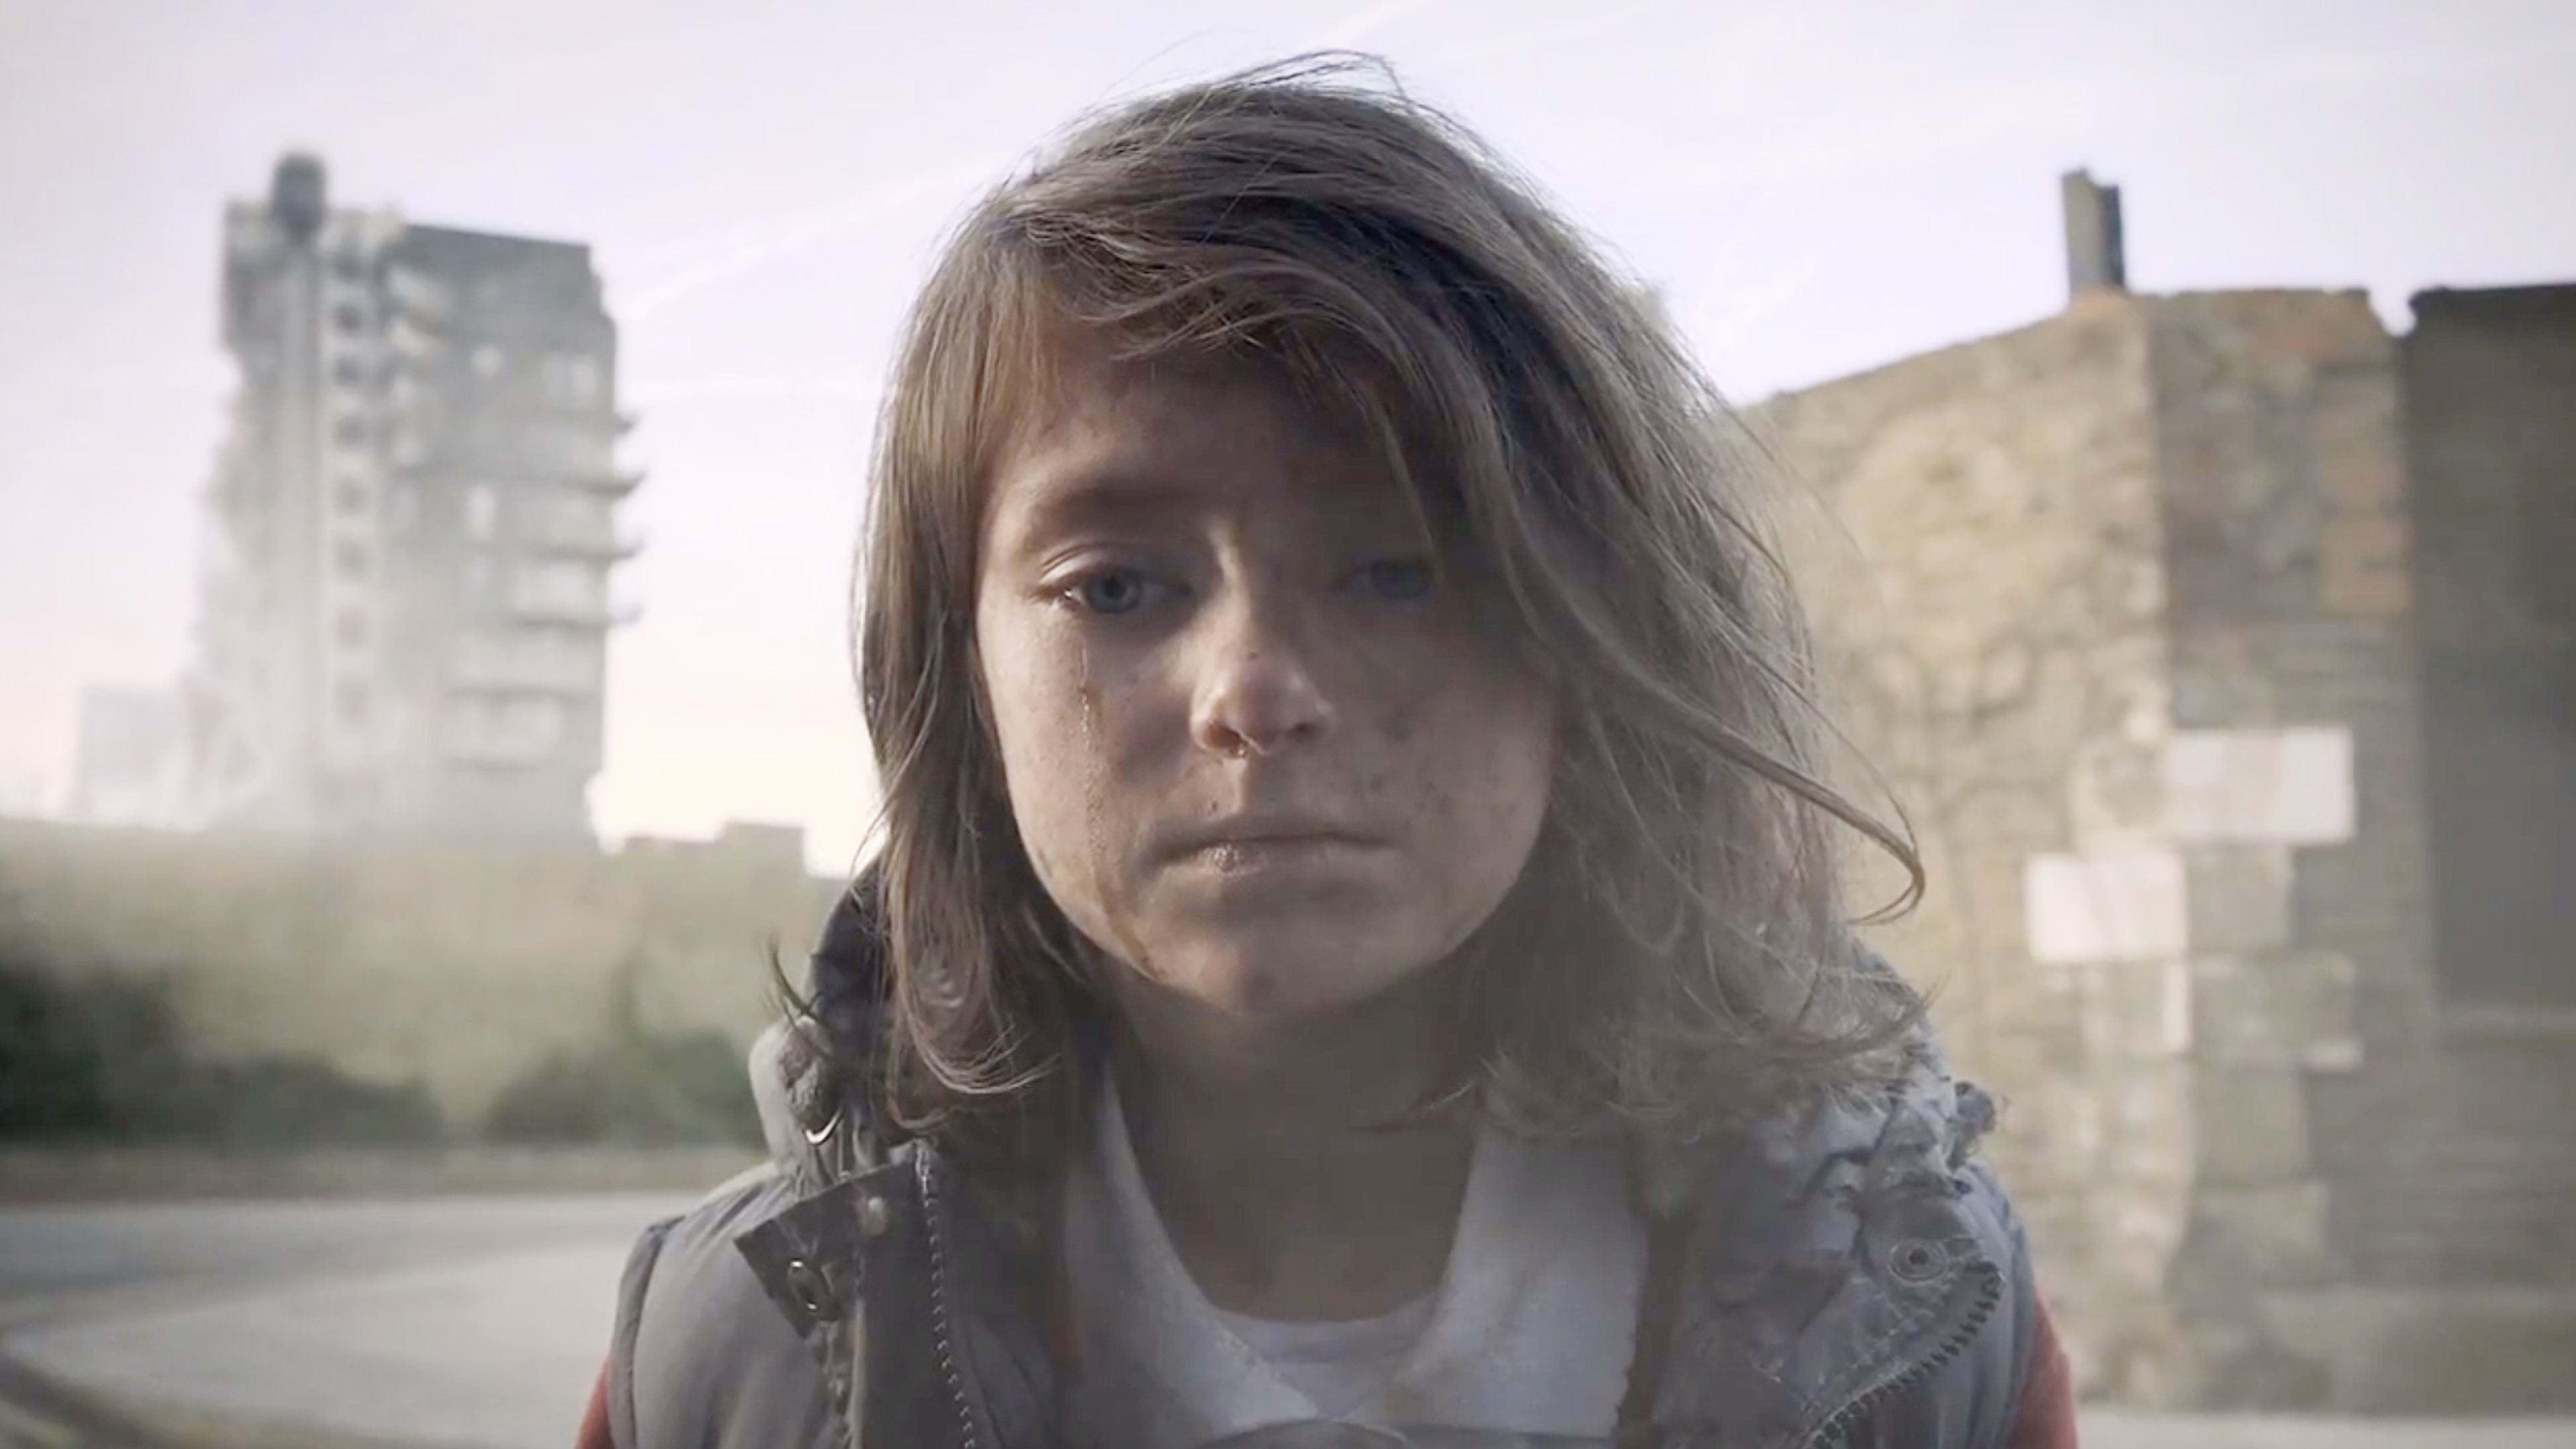 What If A Violent Conflict Were Happening Here? This Chilling Ad Shows You, From A Kid’s Perspective